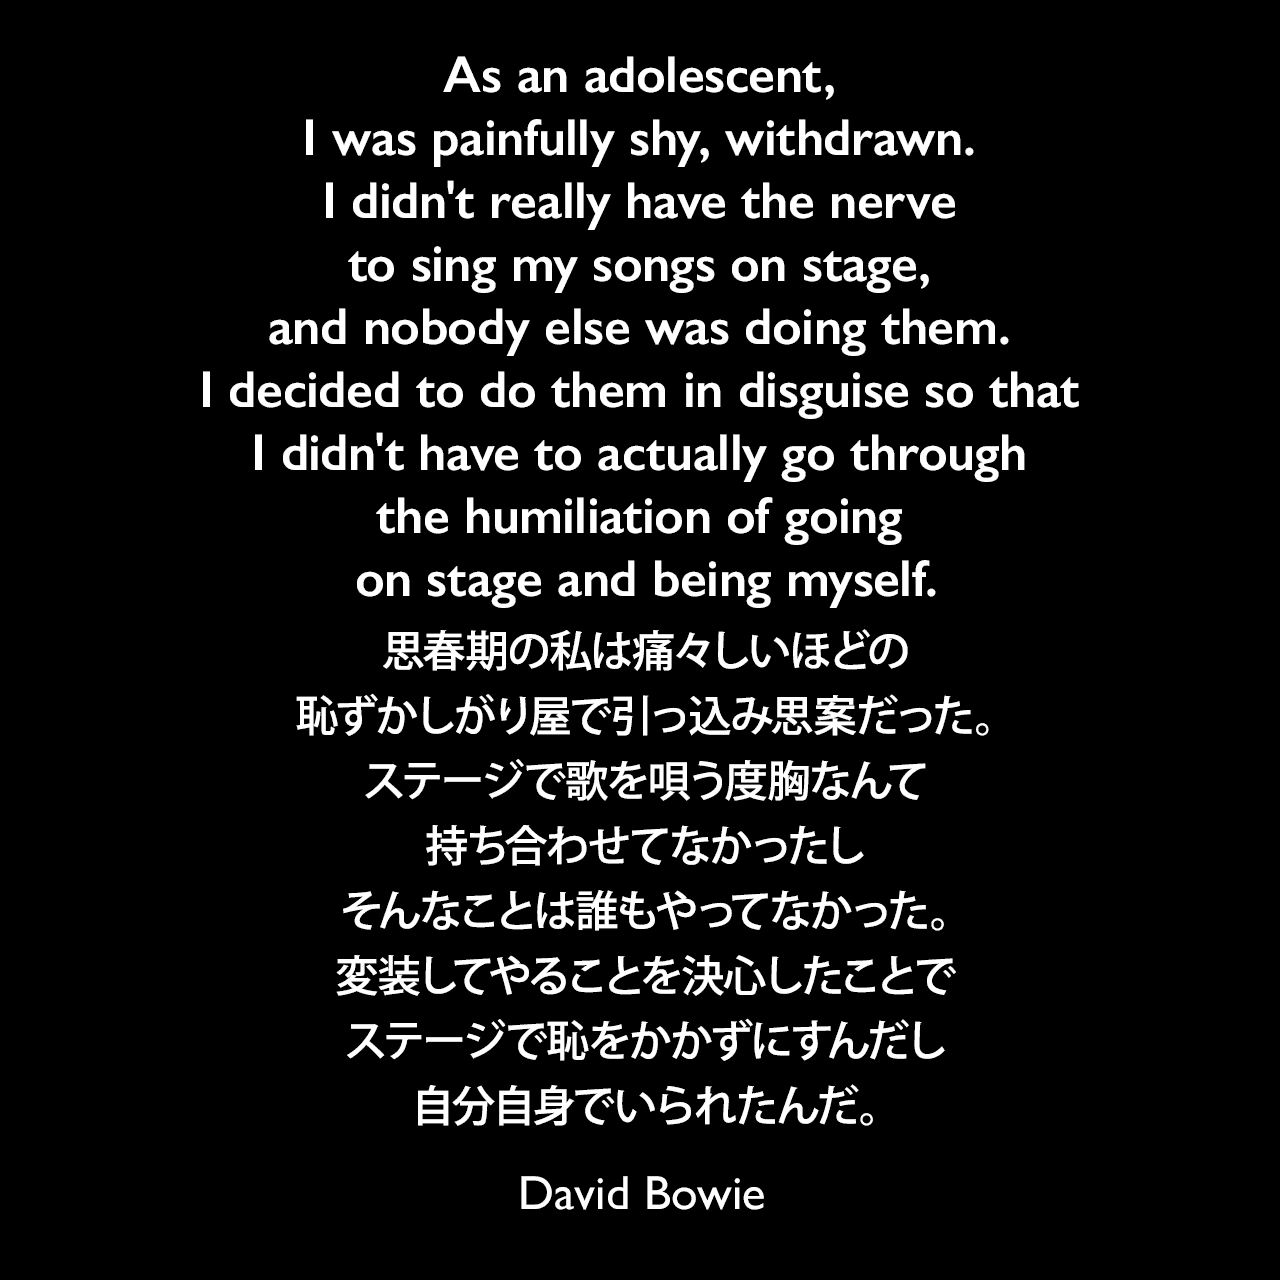 As an adolescent, I was painfully shy, withdrawn. I didn't really have the nerve to sing my songs on stage, and nobody else was doing them. I decided to do them in disguise so that I didn't have to actually go through the humiliation of going on stage and being myself.思春期の私は痛々しいほどの恥ずかしがり屋で引っ込み思案だった。ステージで歌を唄う度胸なんて持ち合わせてなかったし、そんなことは誰もやってなかった。変装してやることを決心したことで、ステージで恥をかかずにすんだし、自分自身でいられたんだ。David Bowie